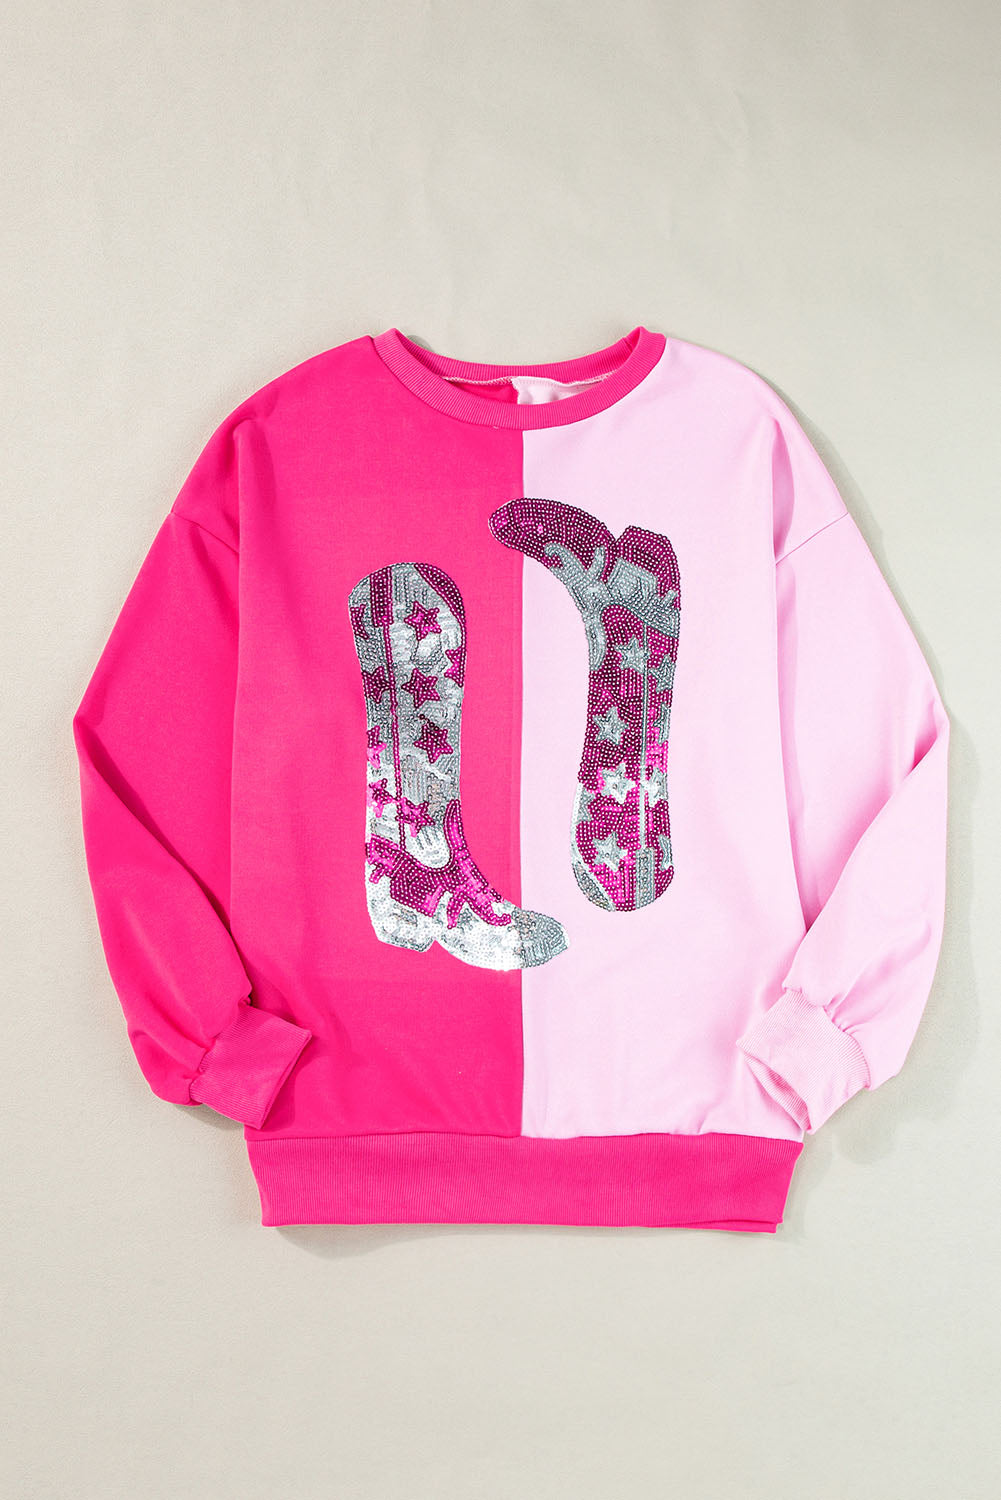 Pink 100%polyester - Color Block Sequined Cowgirl Boots Women's Graphic Sweatshirt - women's sweatshirt at TFC&H Co.